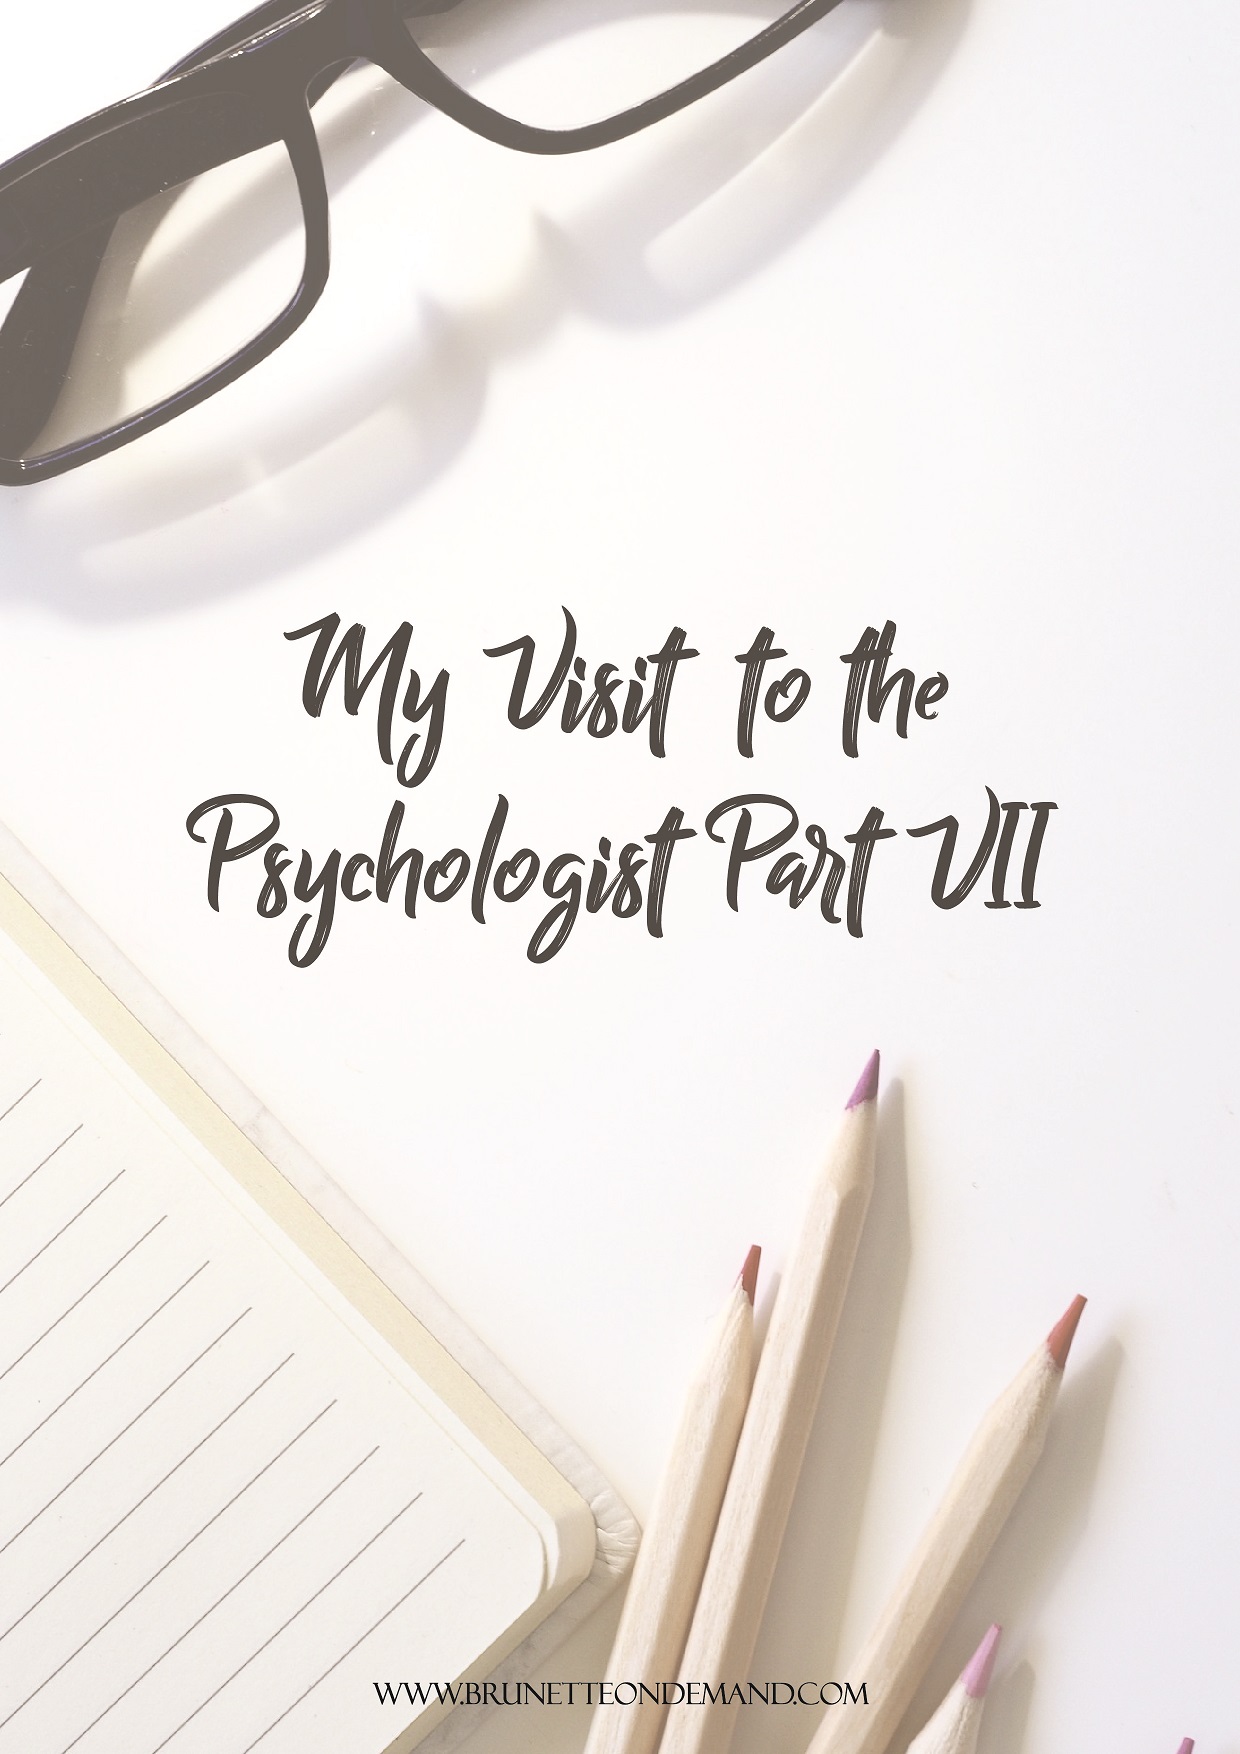 My Visit To The Psychologist Part VII